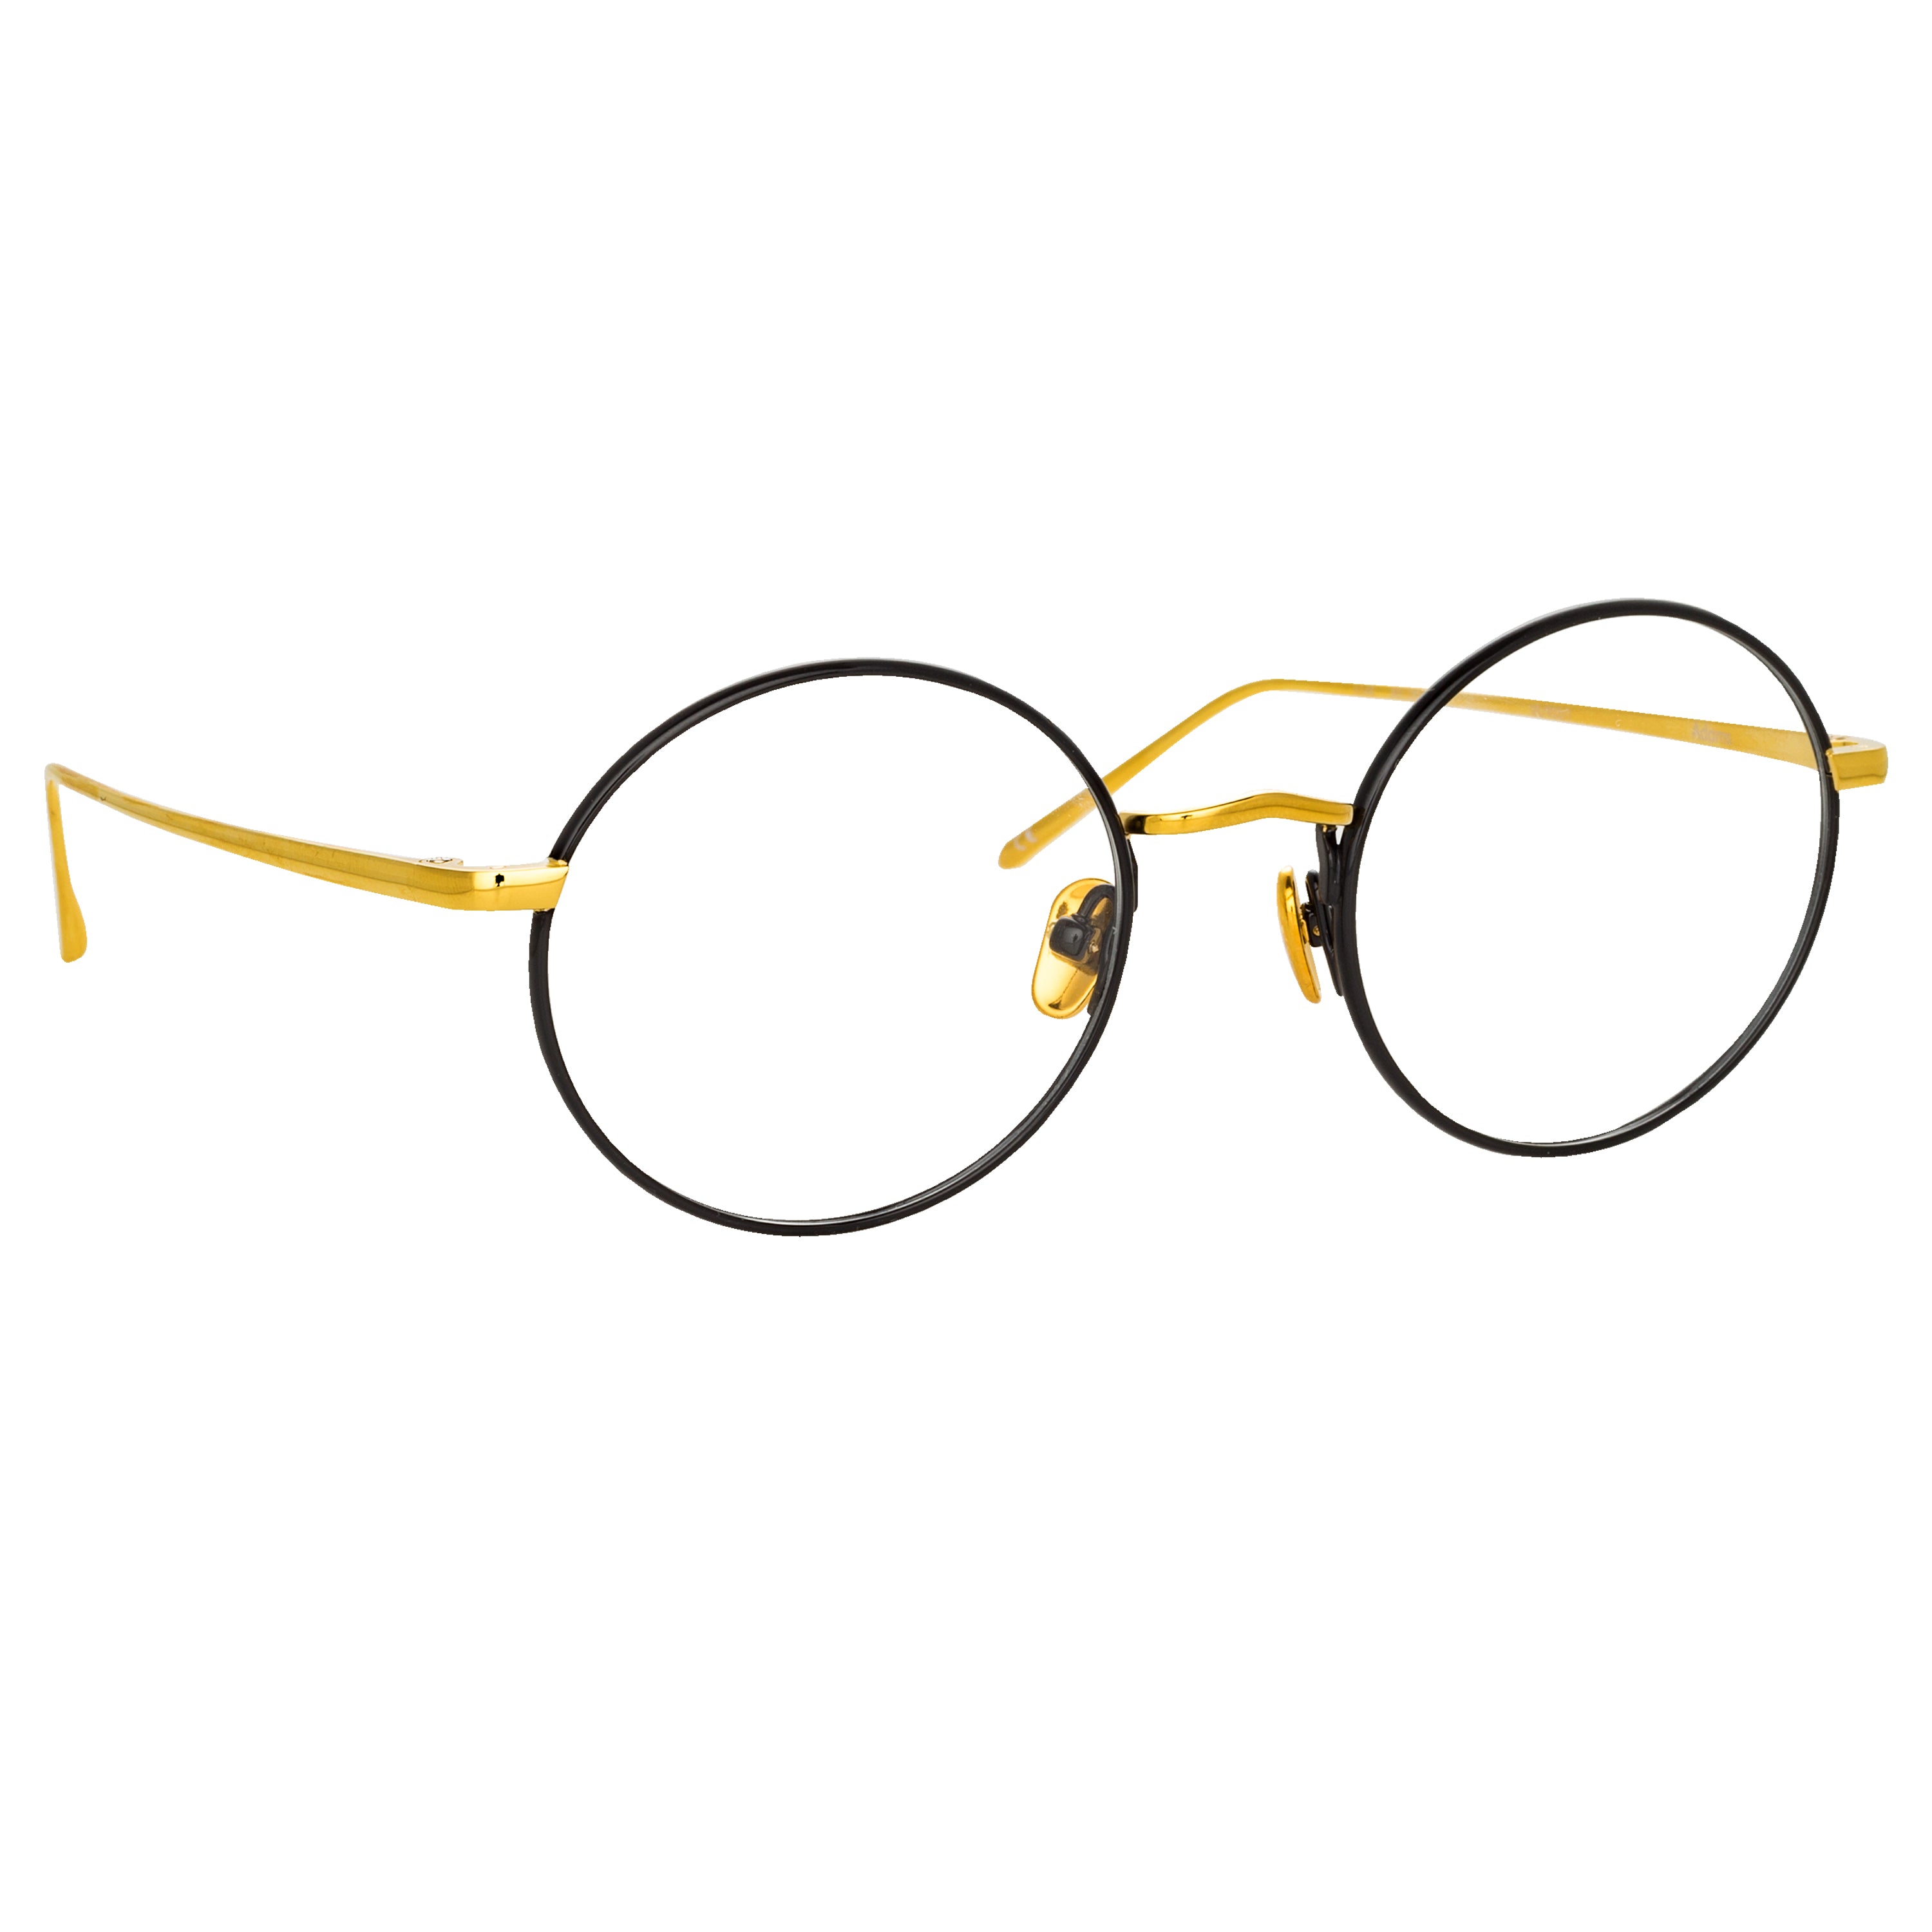 The Adams Optical Frame in Black and Yellow Gold (C1)